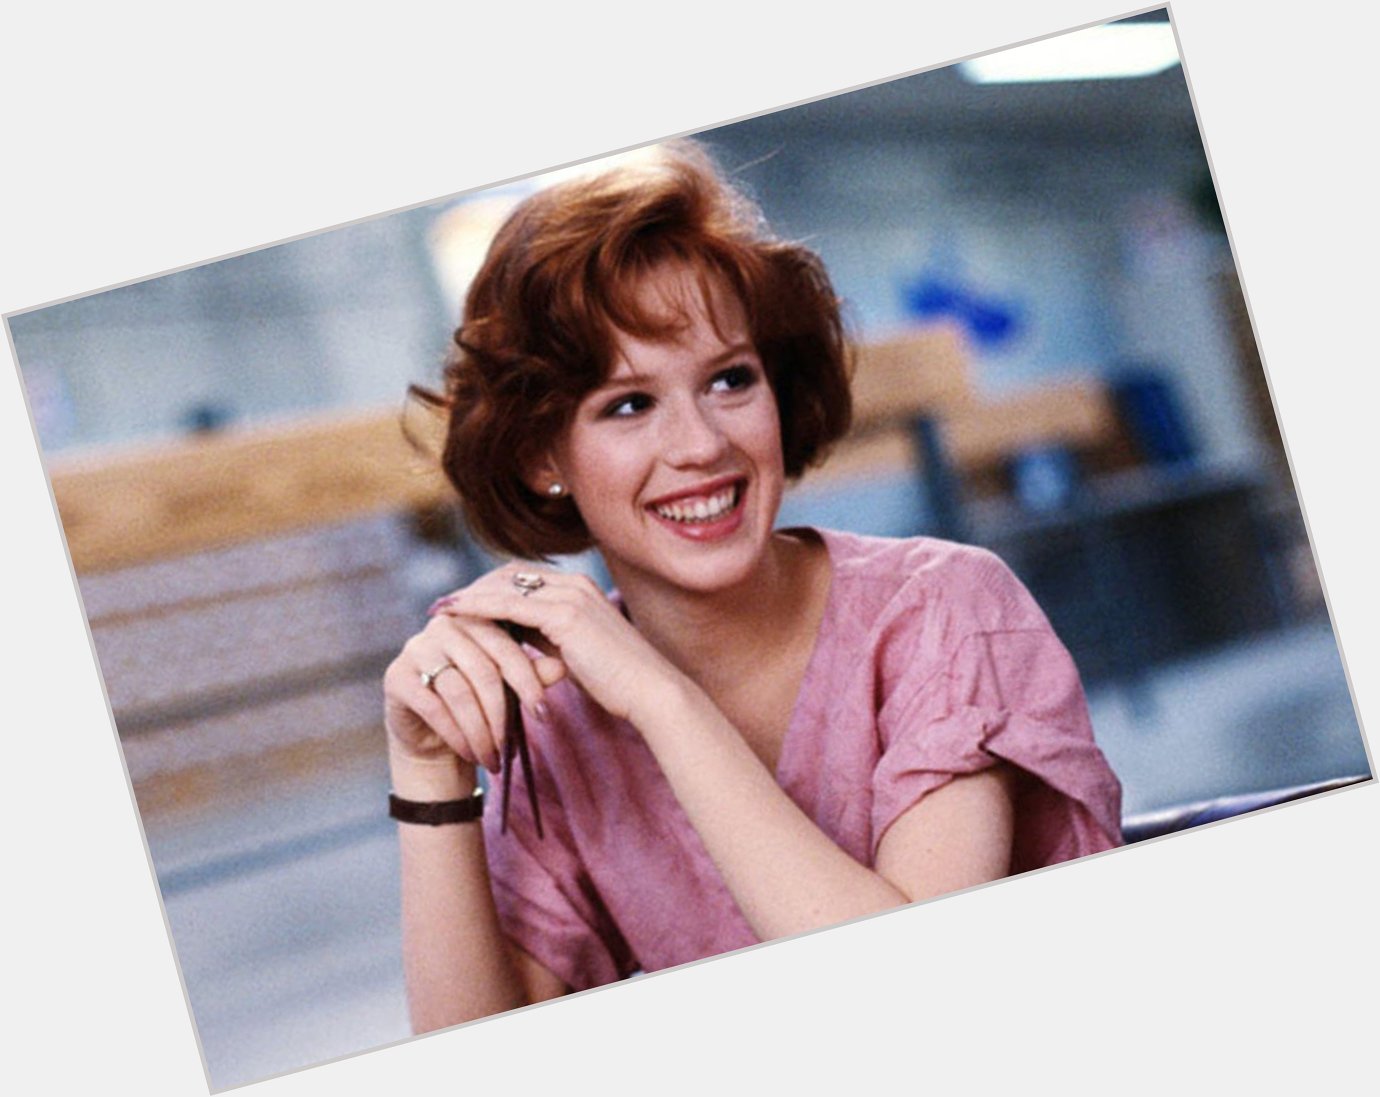 Happy 52nd birthday to Molly Ringwald who starred in some of my favourite 80s films. 